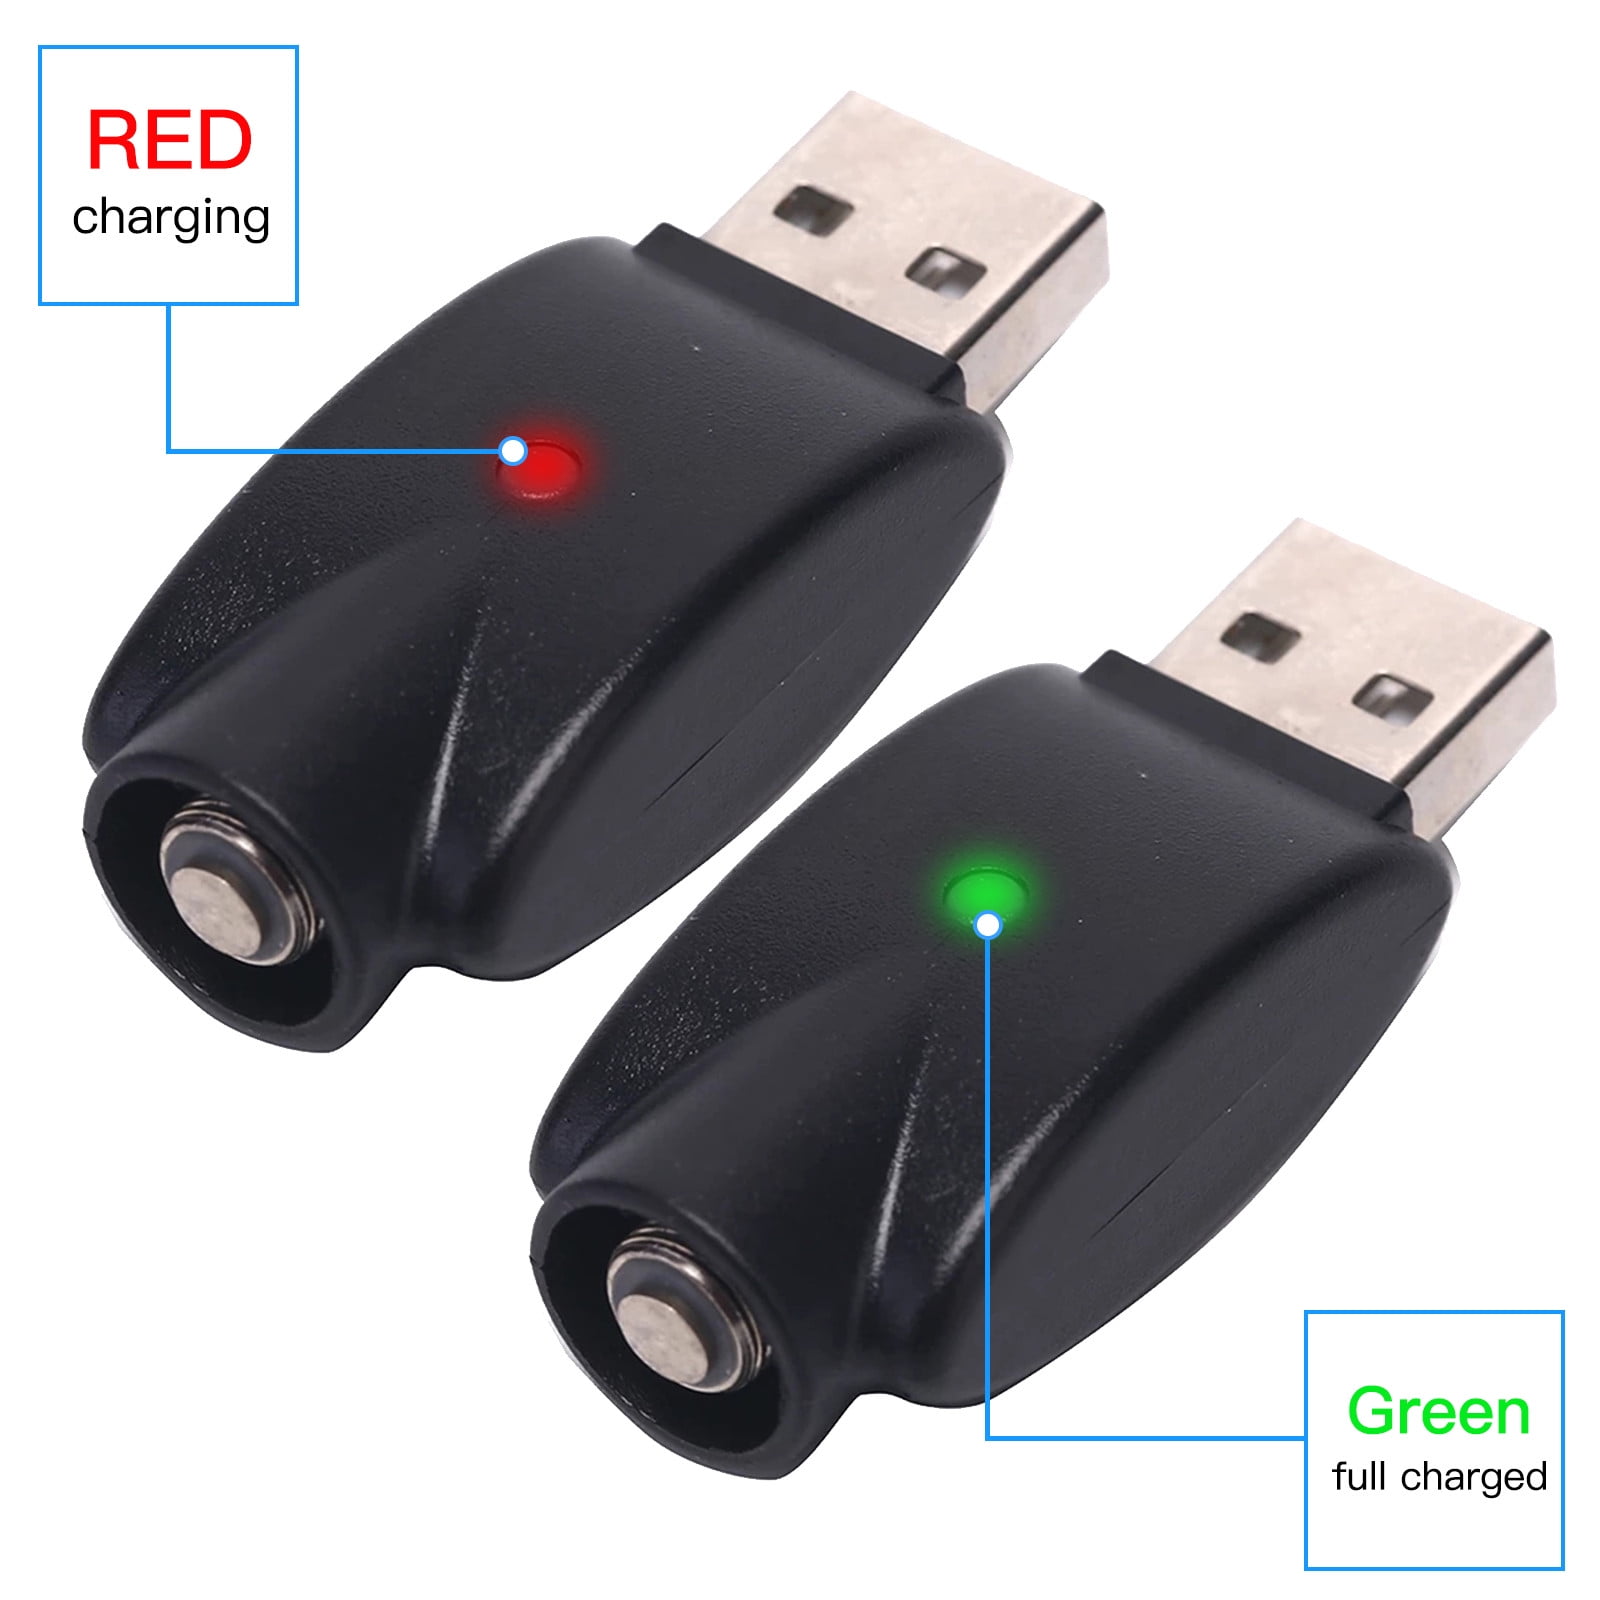 Portable USB Charger Charger USB Thread Cable Intelligent Overcharge Protection 2PC with LED Indicator Light 